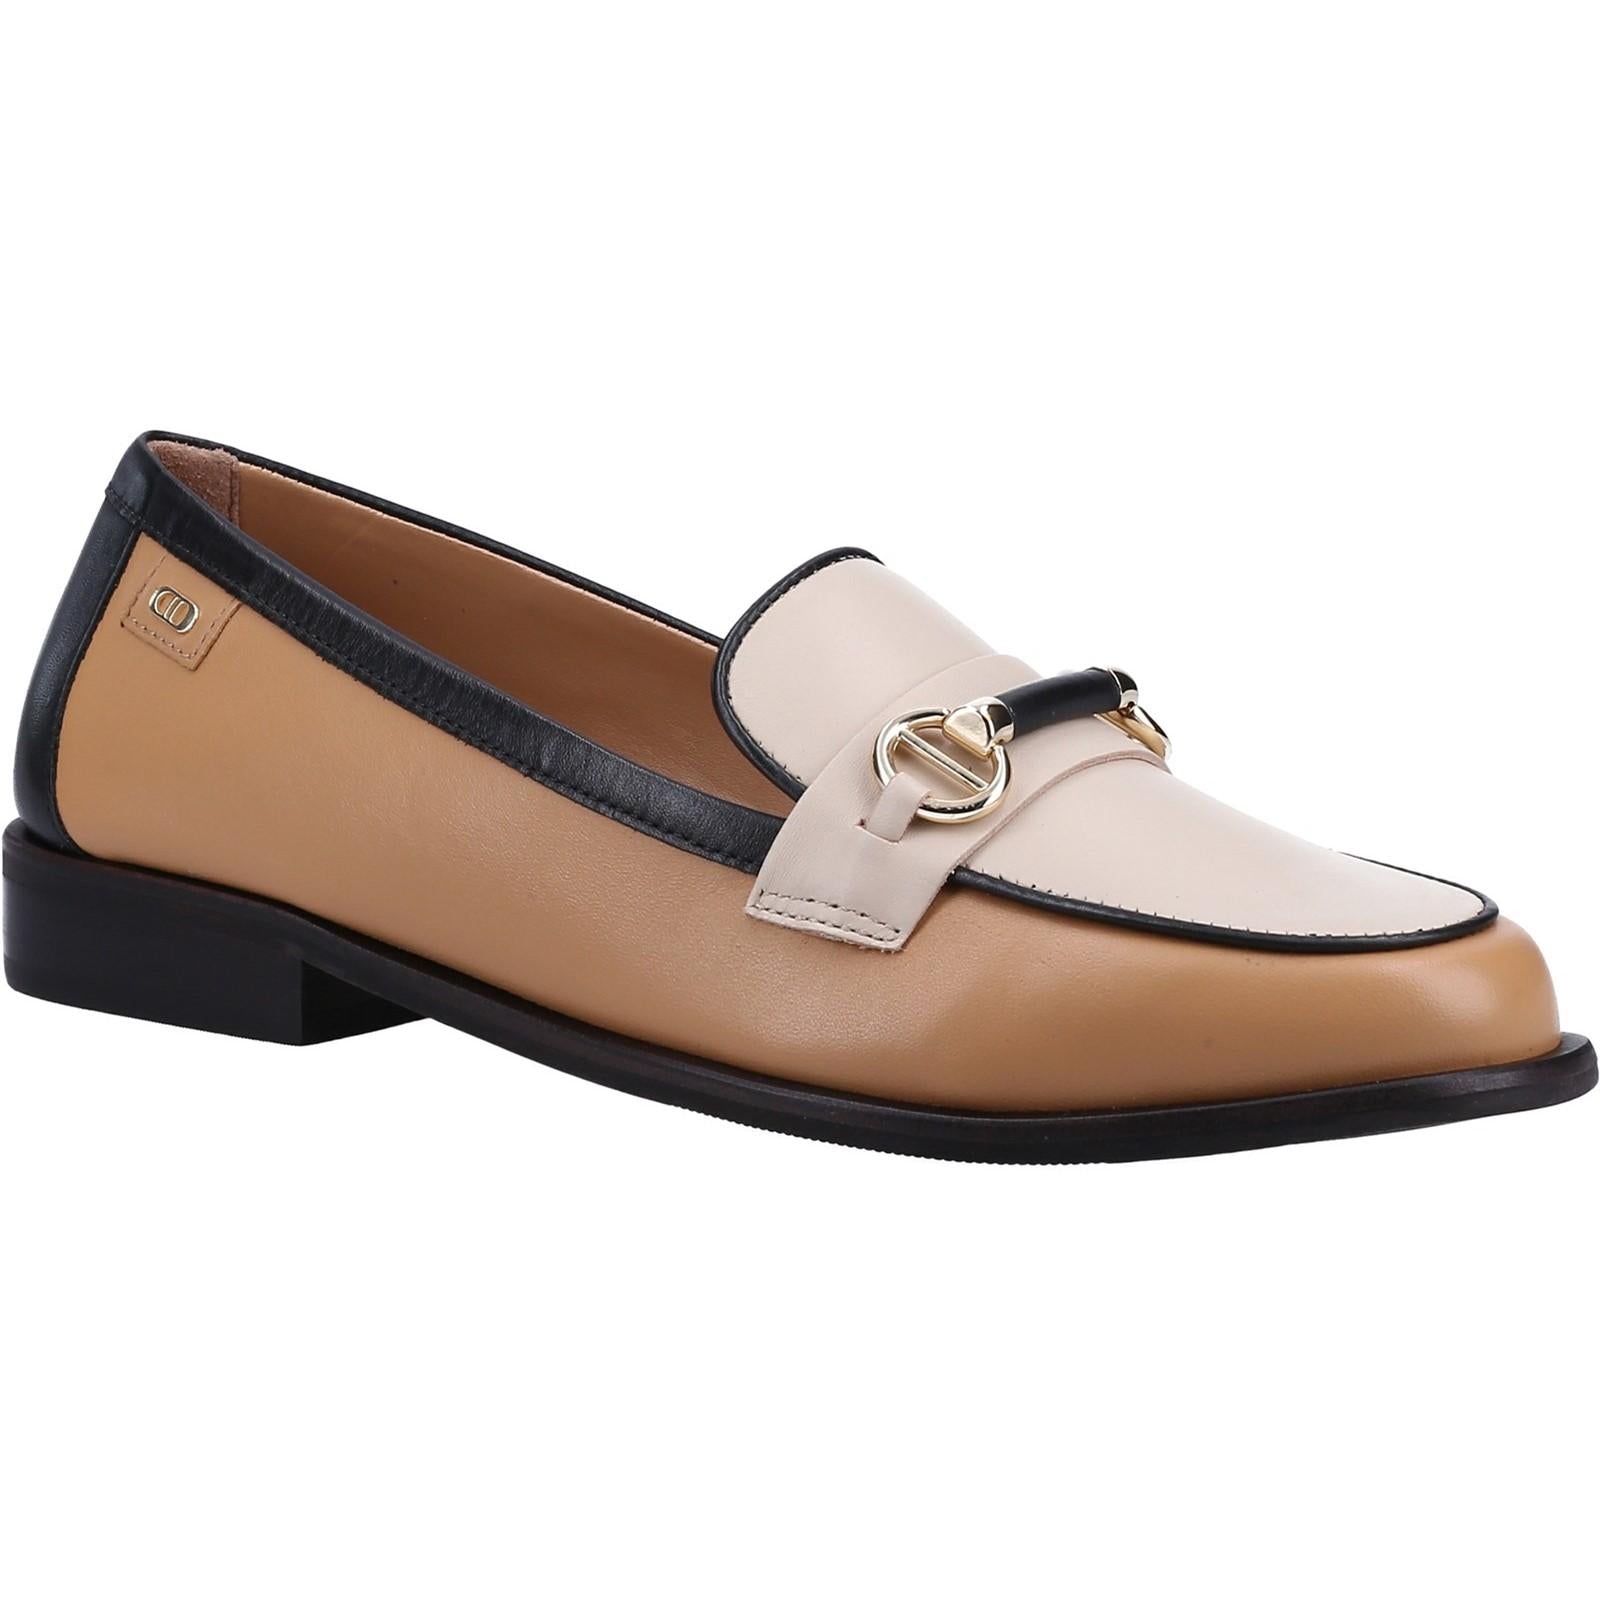 Dune London Glossi Loafers Flats